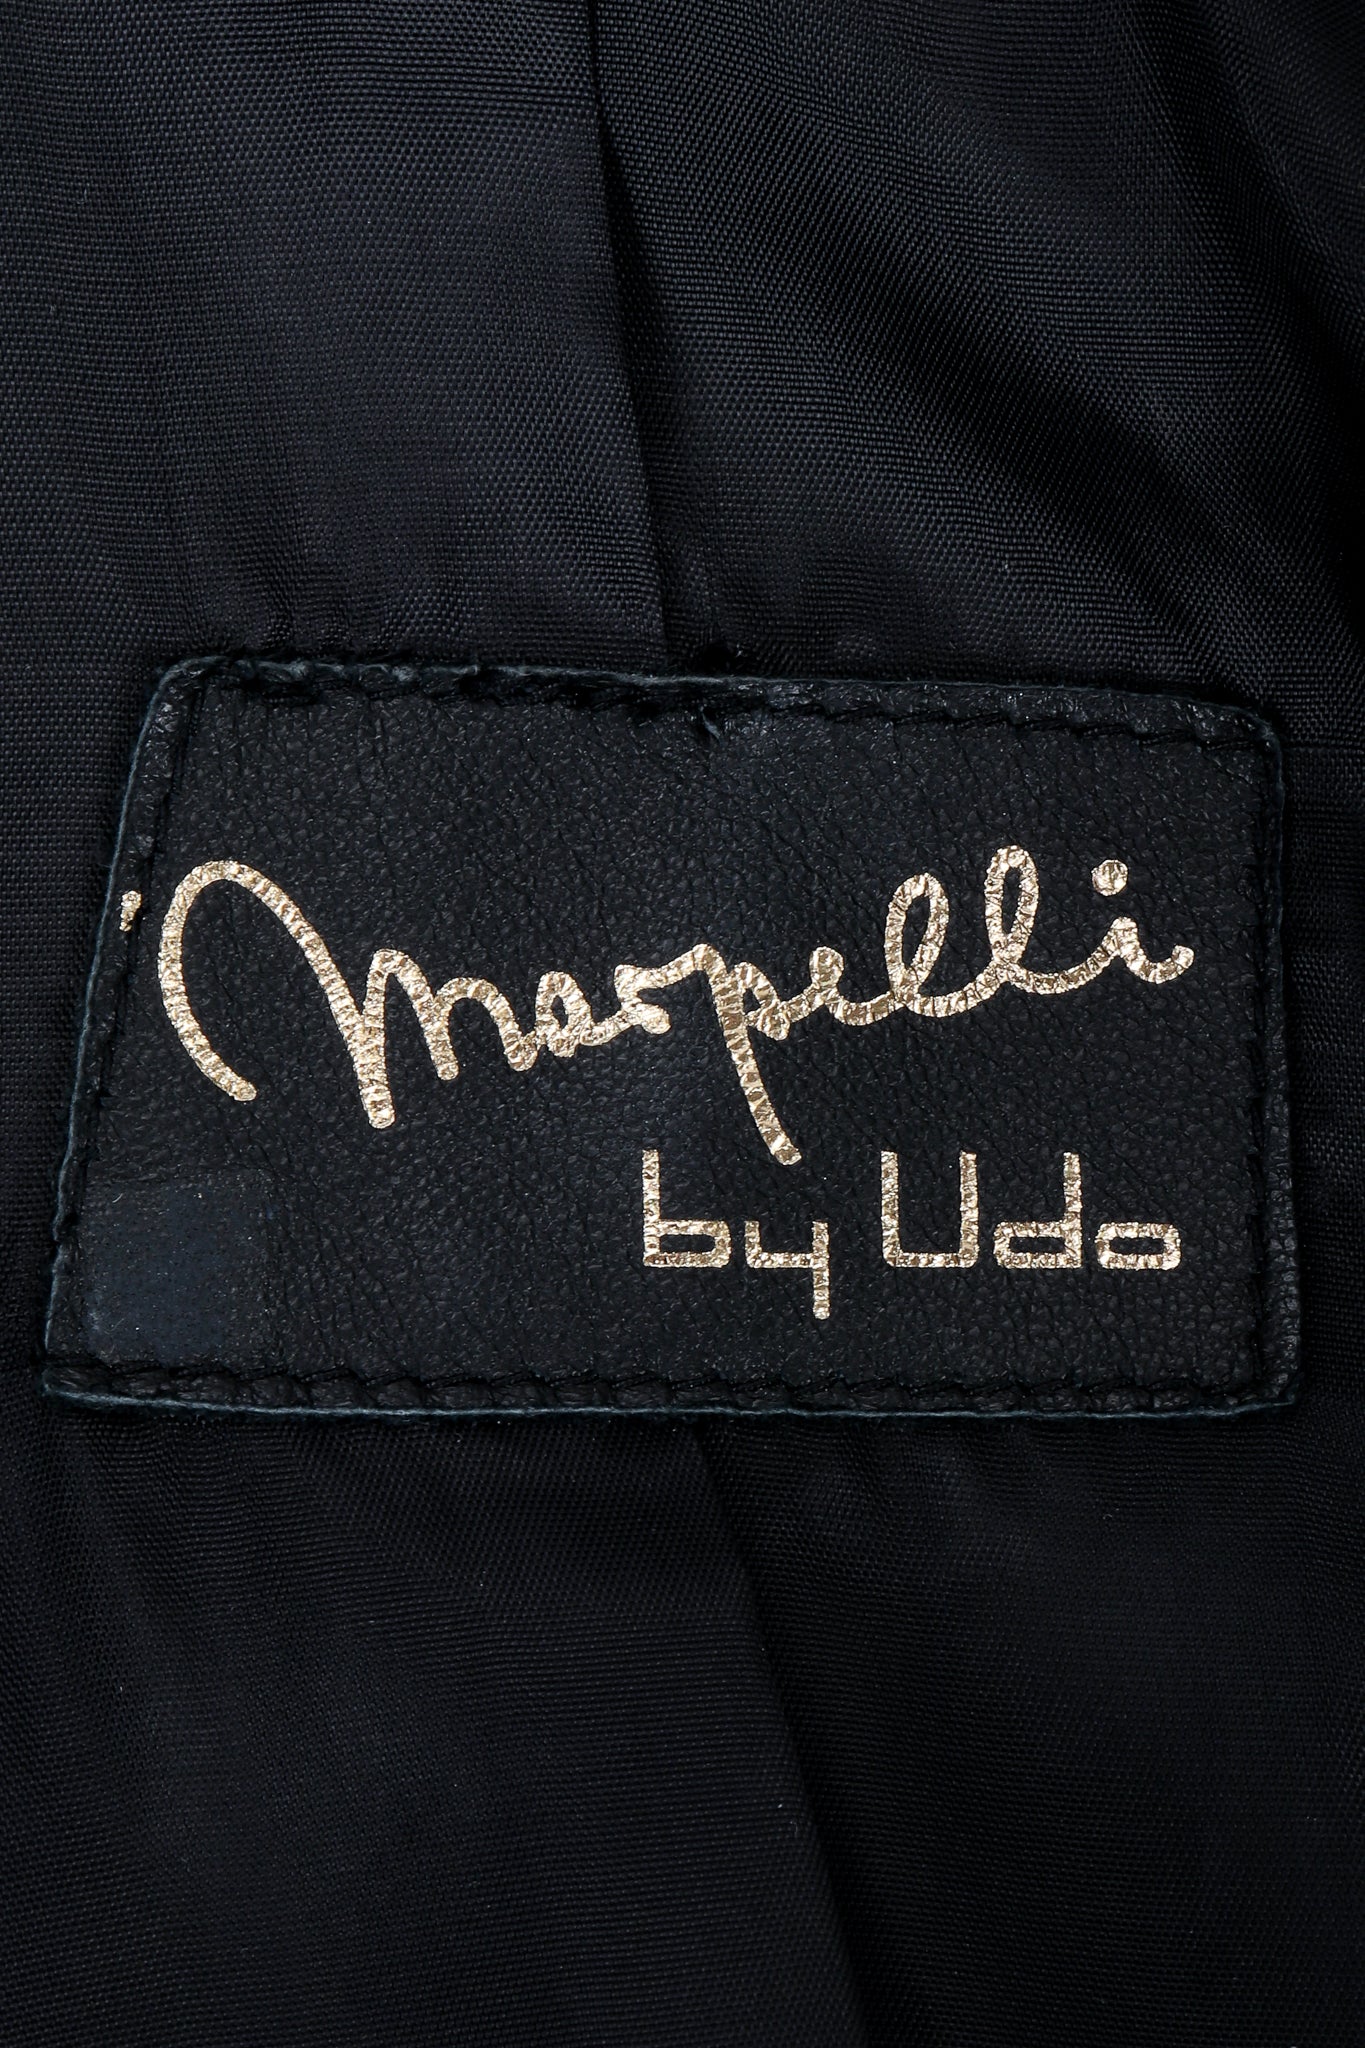 Vintage Marpelli by Udo label on black fabric